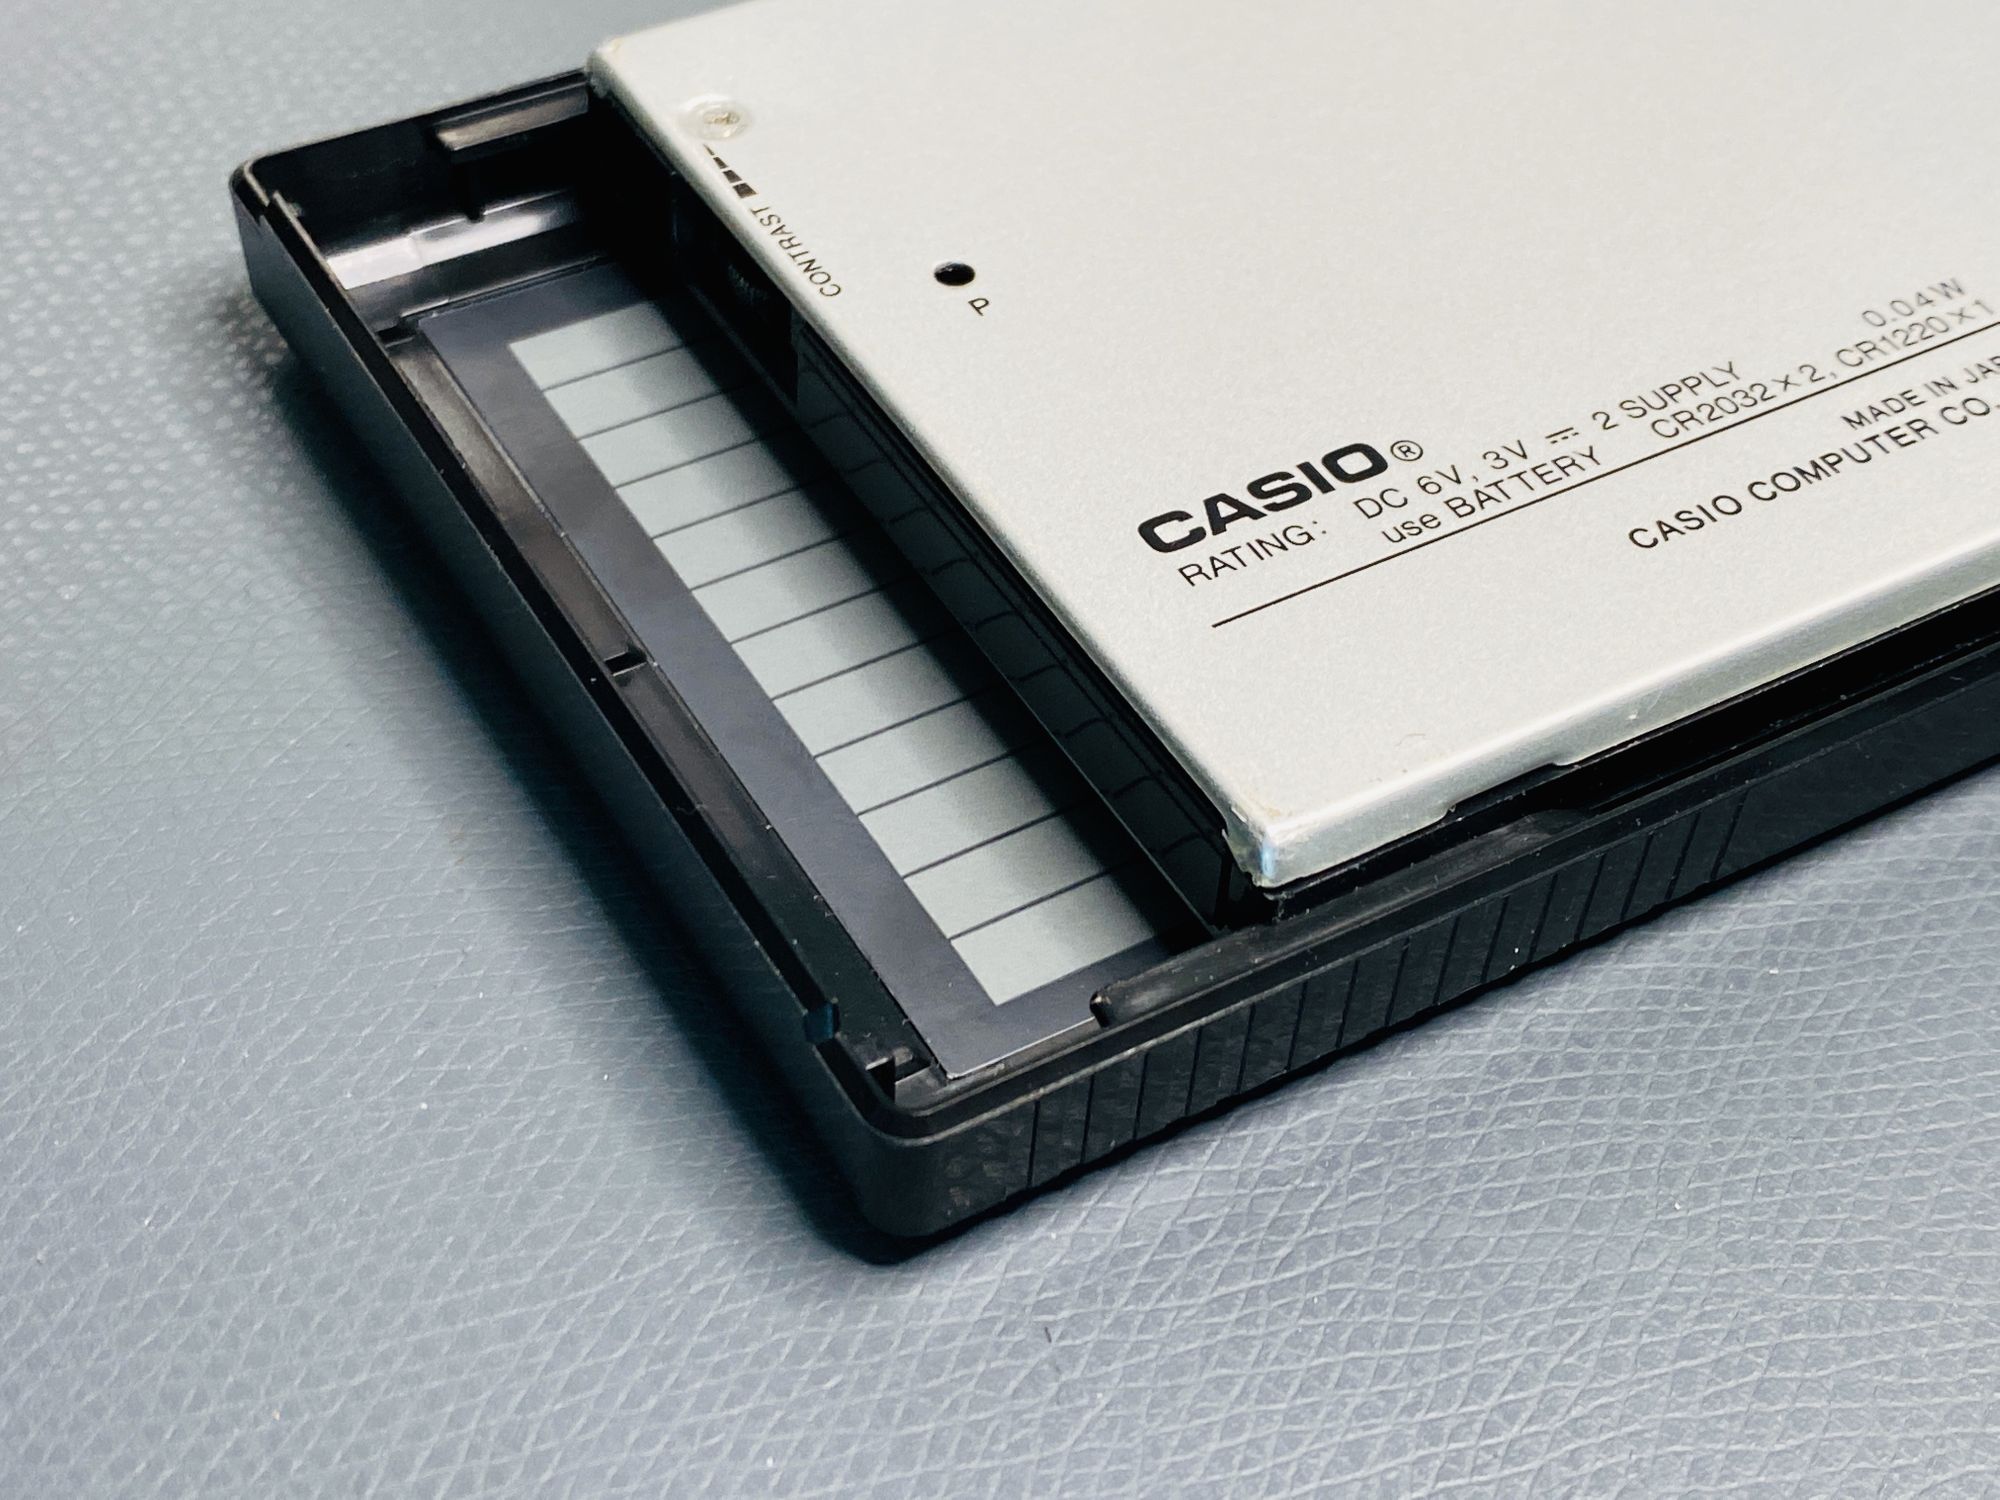 This was one of the last models to use aluminium case - both front and back with a plastic core. 